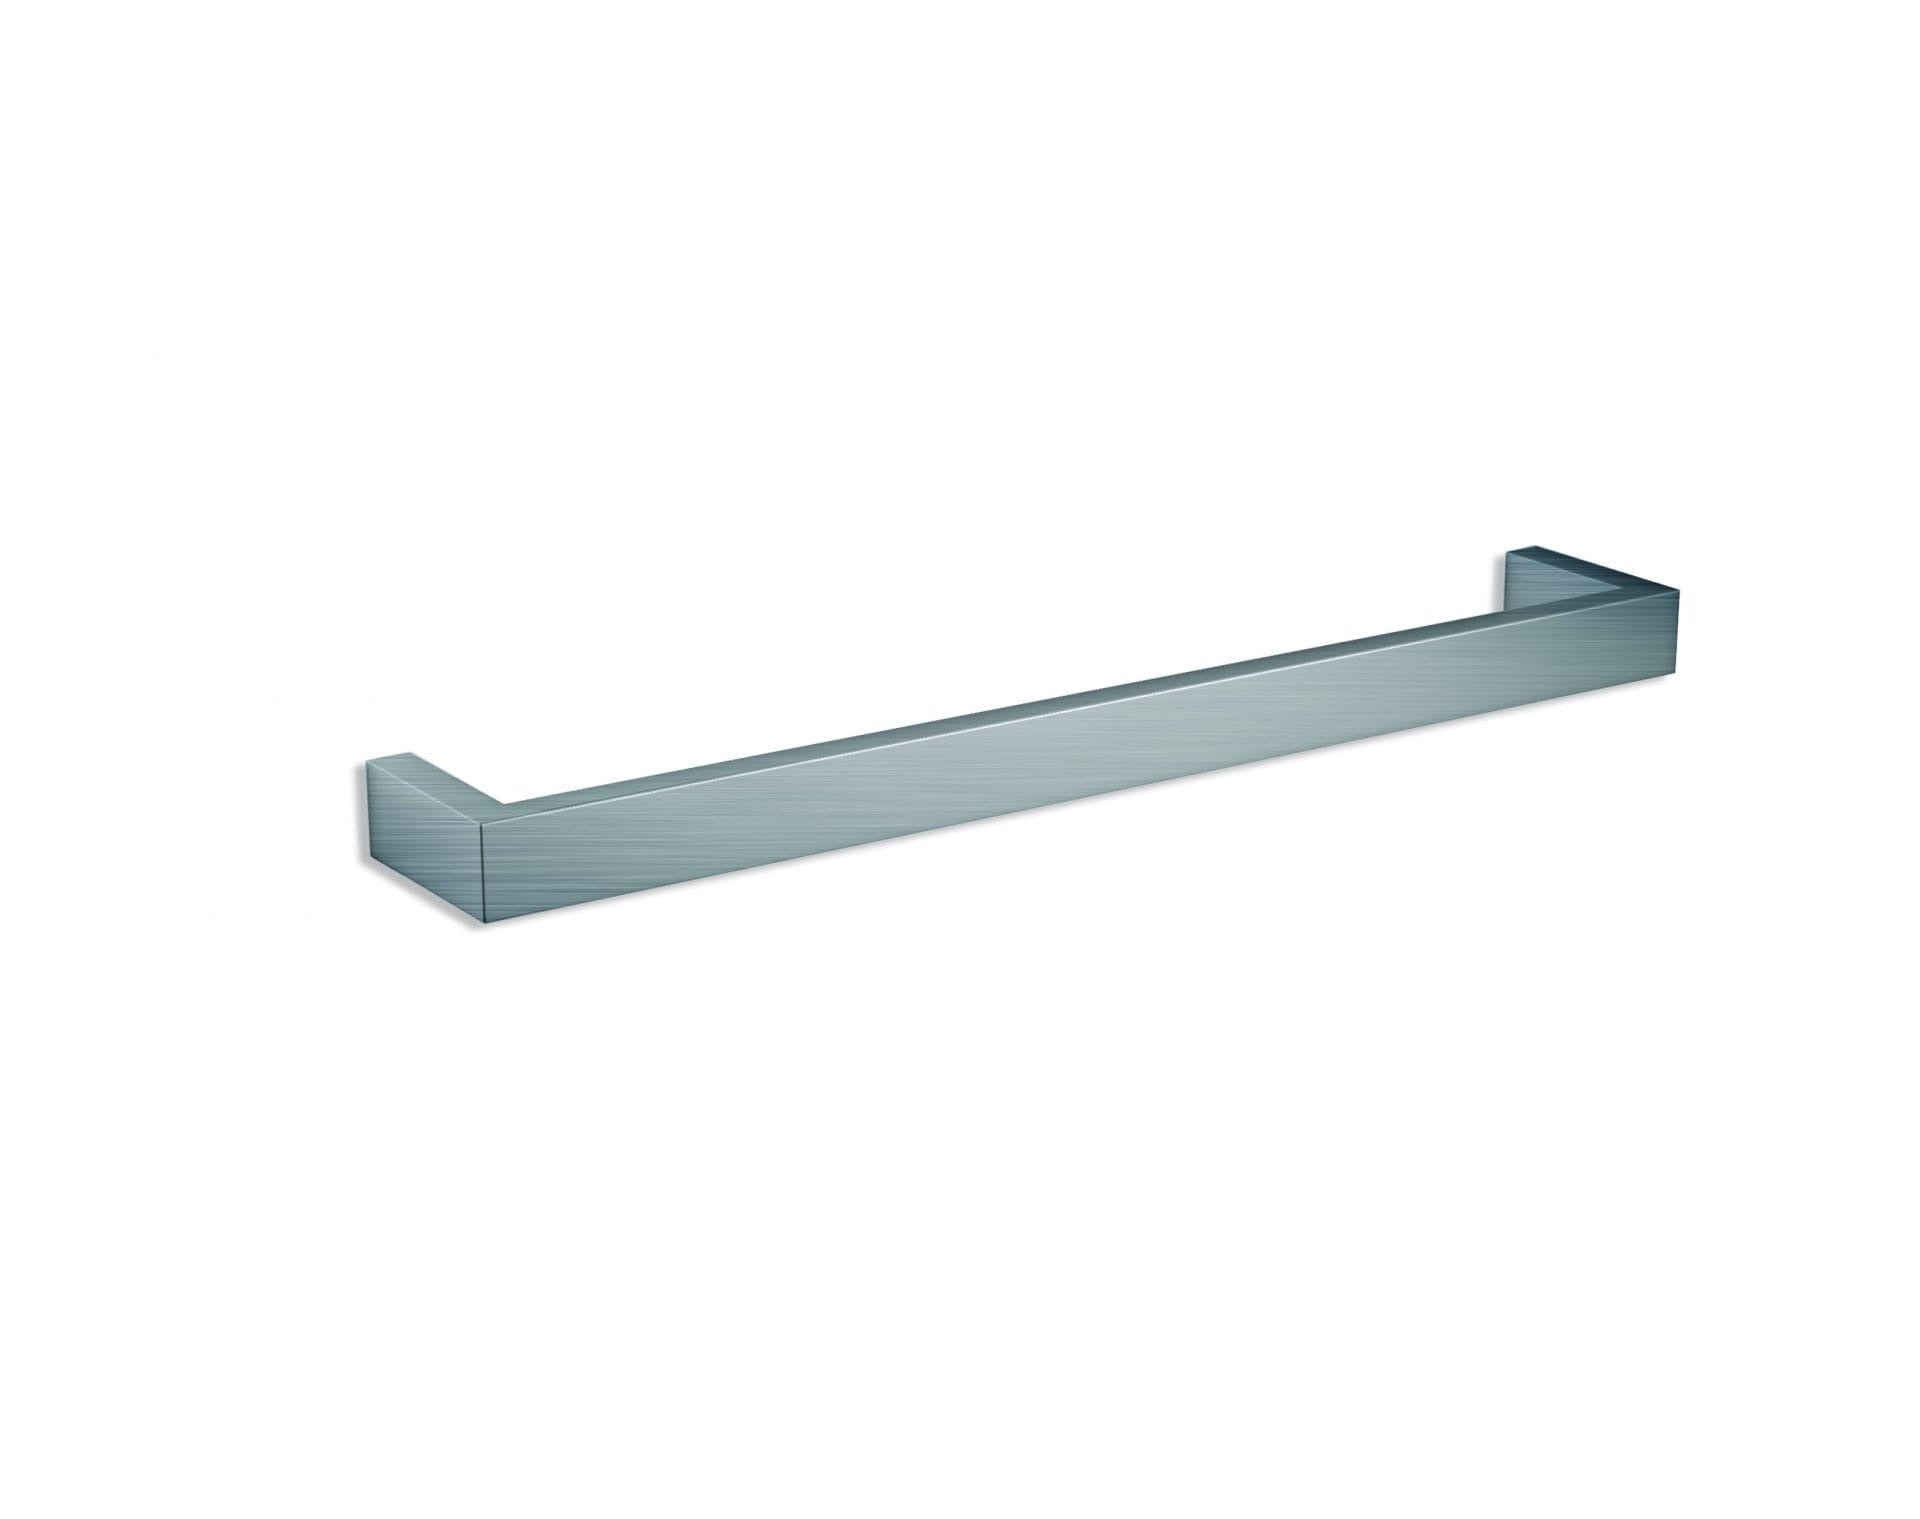 THERMOGROUP NON-HEATED SINGLE TOWEL RAIL SQUARE BRUSHED STAINLESS STEEL 632MM